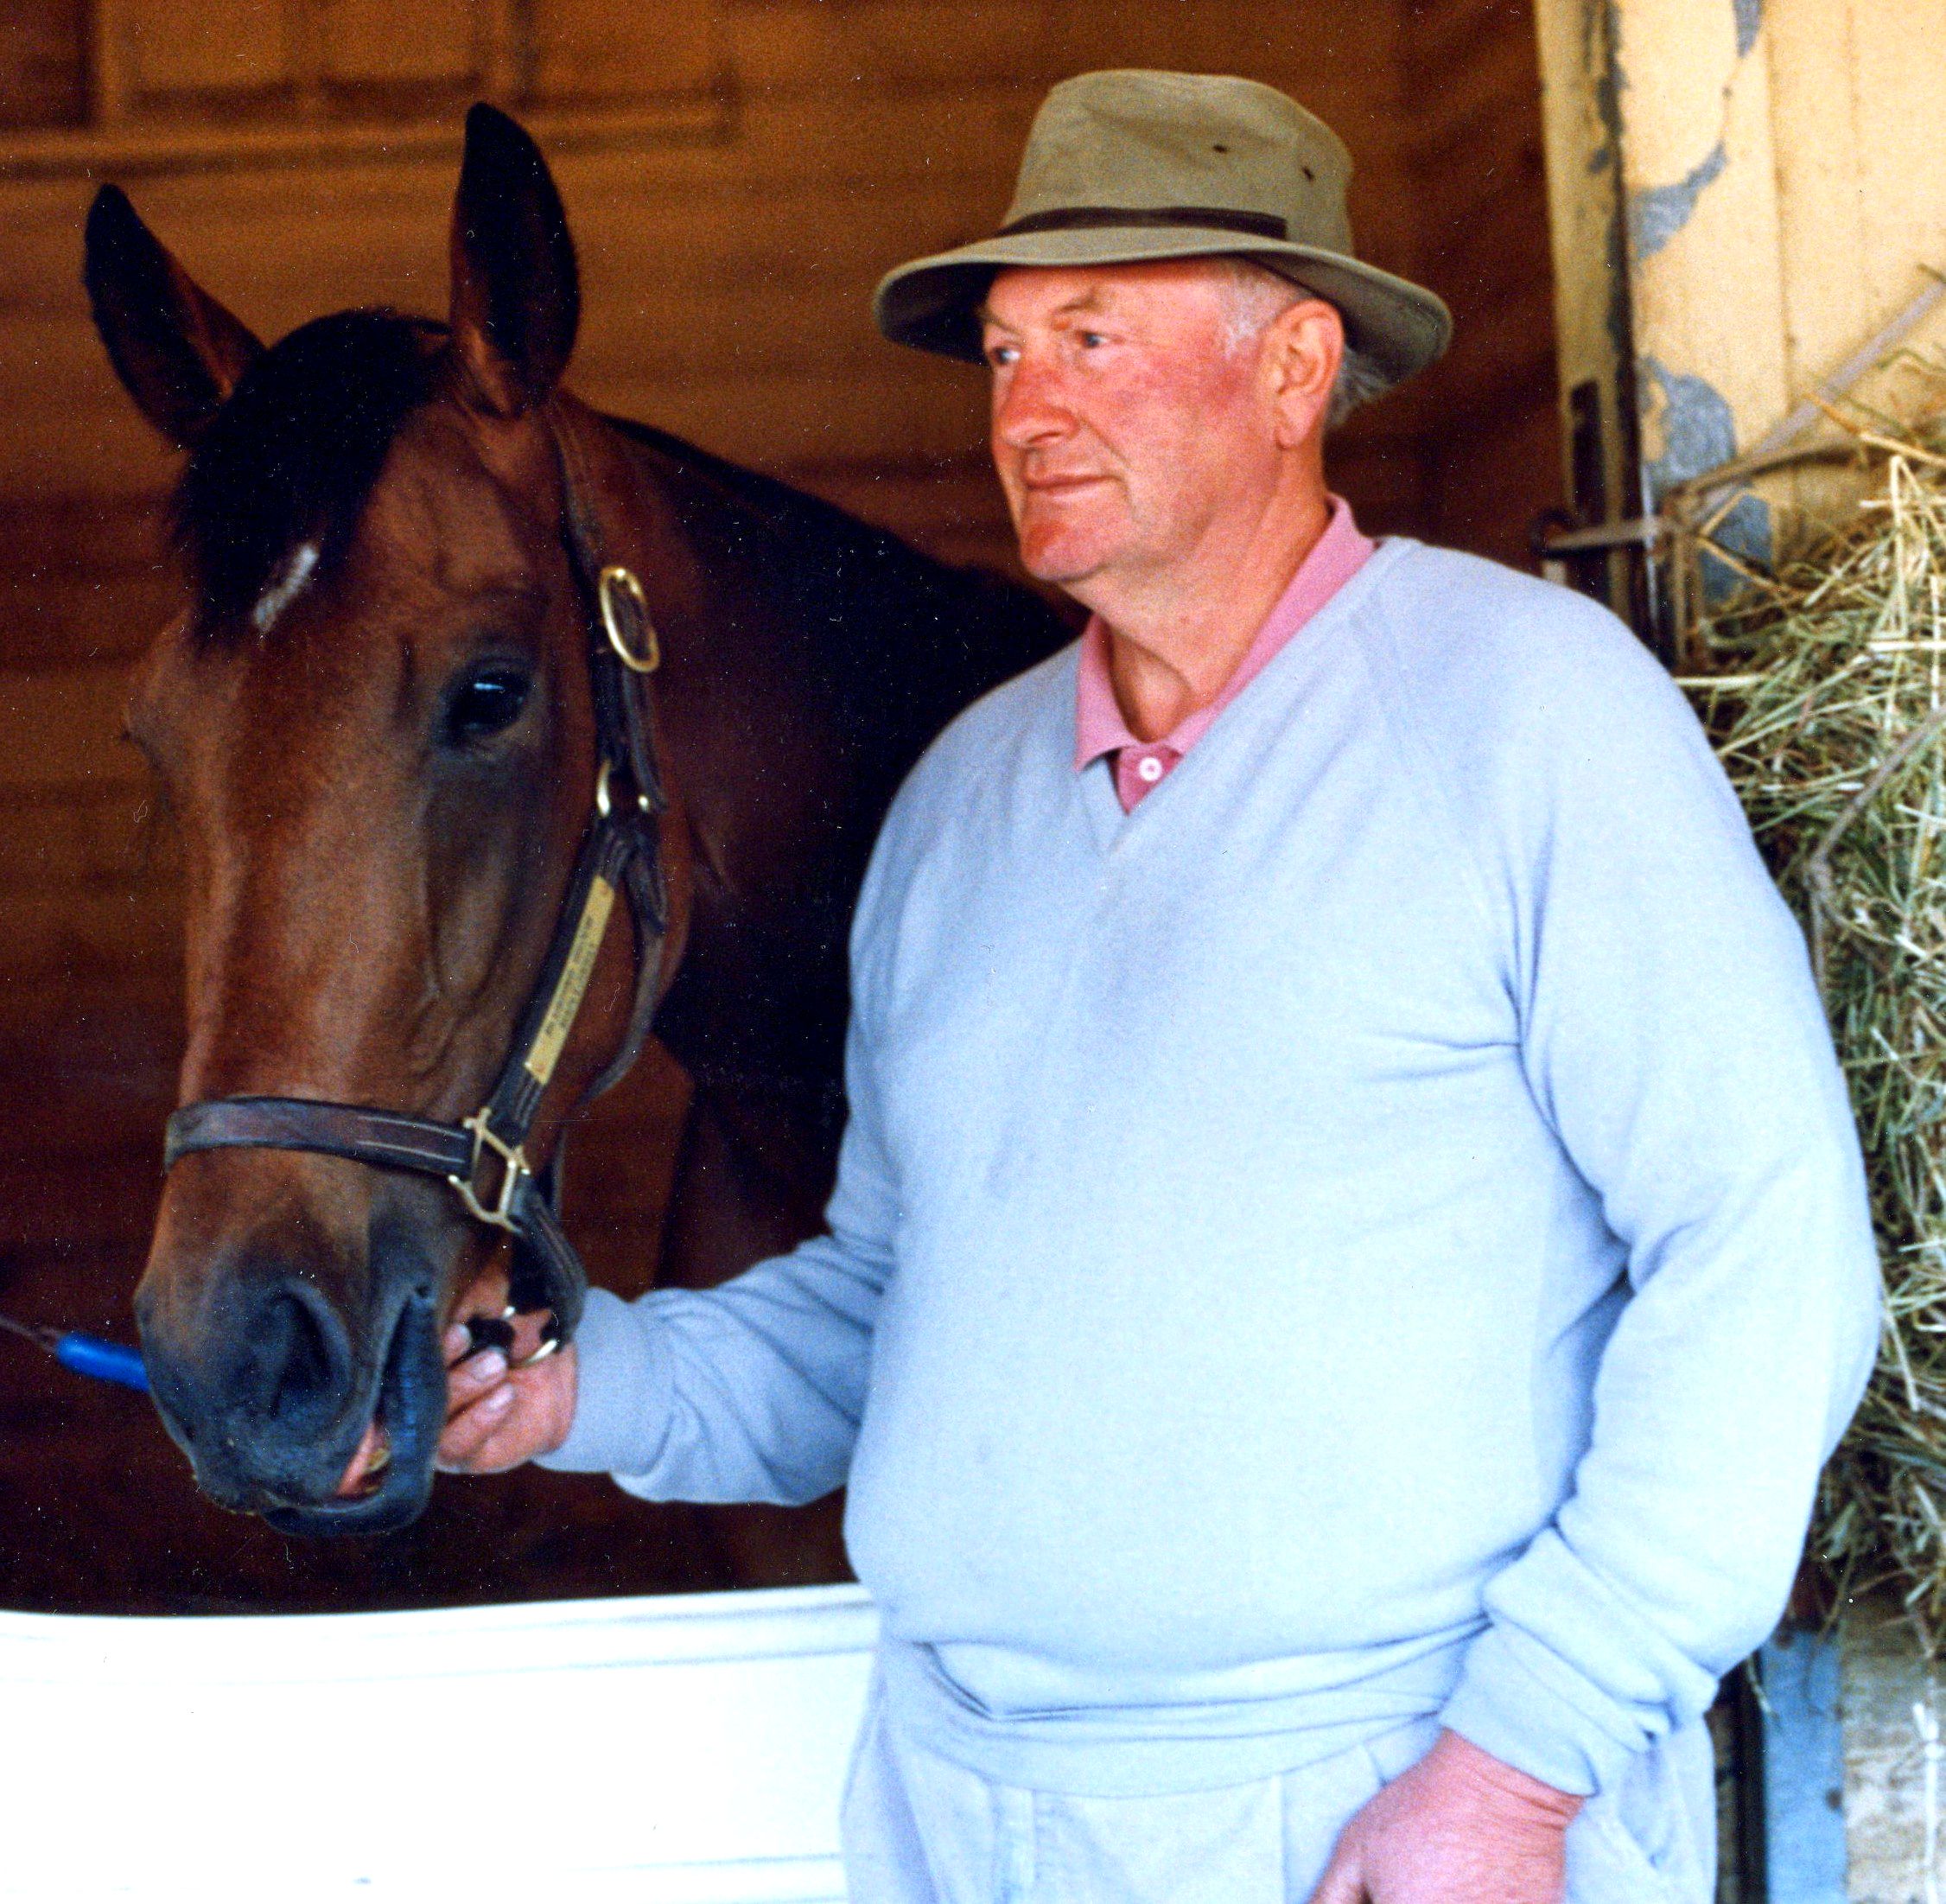 Sky Beauty and trainer Allen Jerkens (Barbara Ann Giove Coletta/Museum Collection)